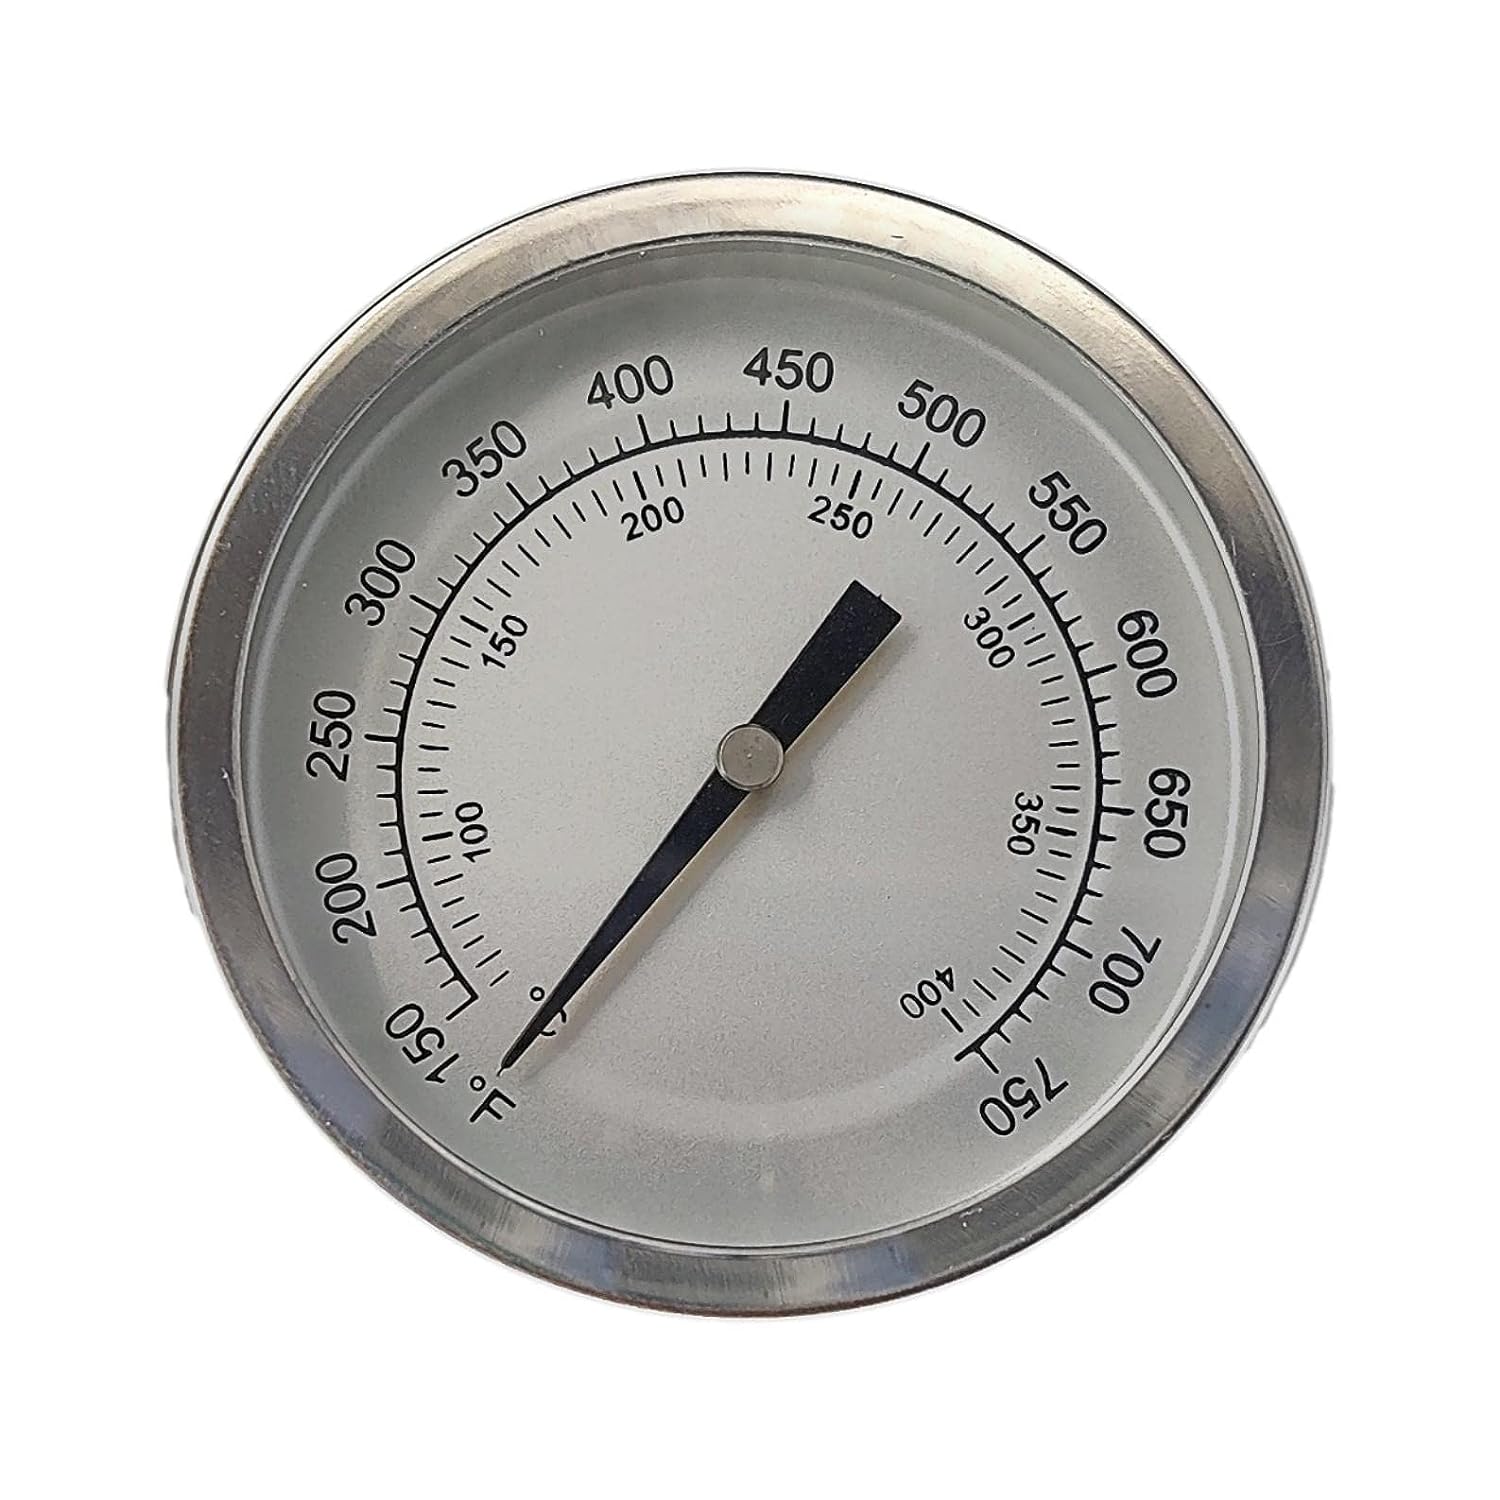 Replacement 74402 Dome Thermometer for Pit Boss Wood Pellet Grills - PB700FB, PB700D, PB820FB, PB820D,Grill Lid Thermometer for Pit Boss 700 Classic